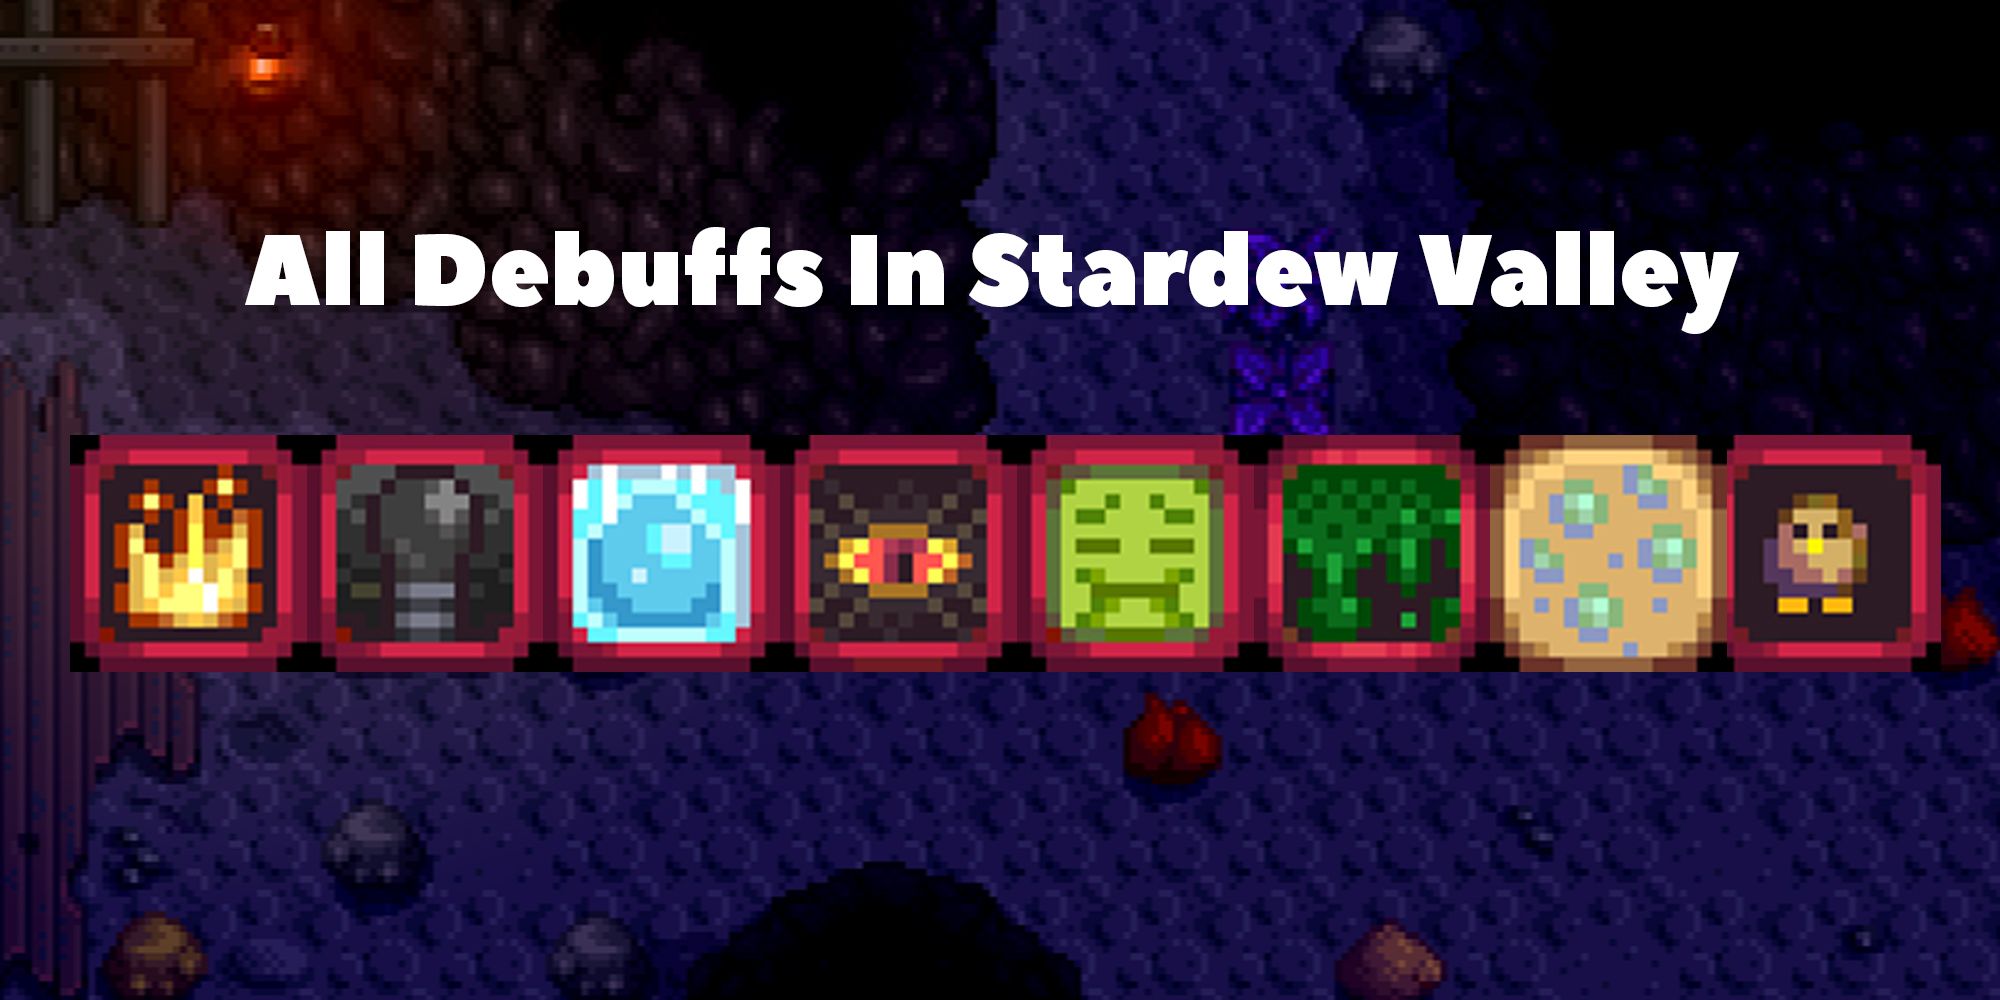     All status debuffs available in Stardew Valley.